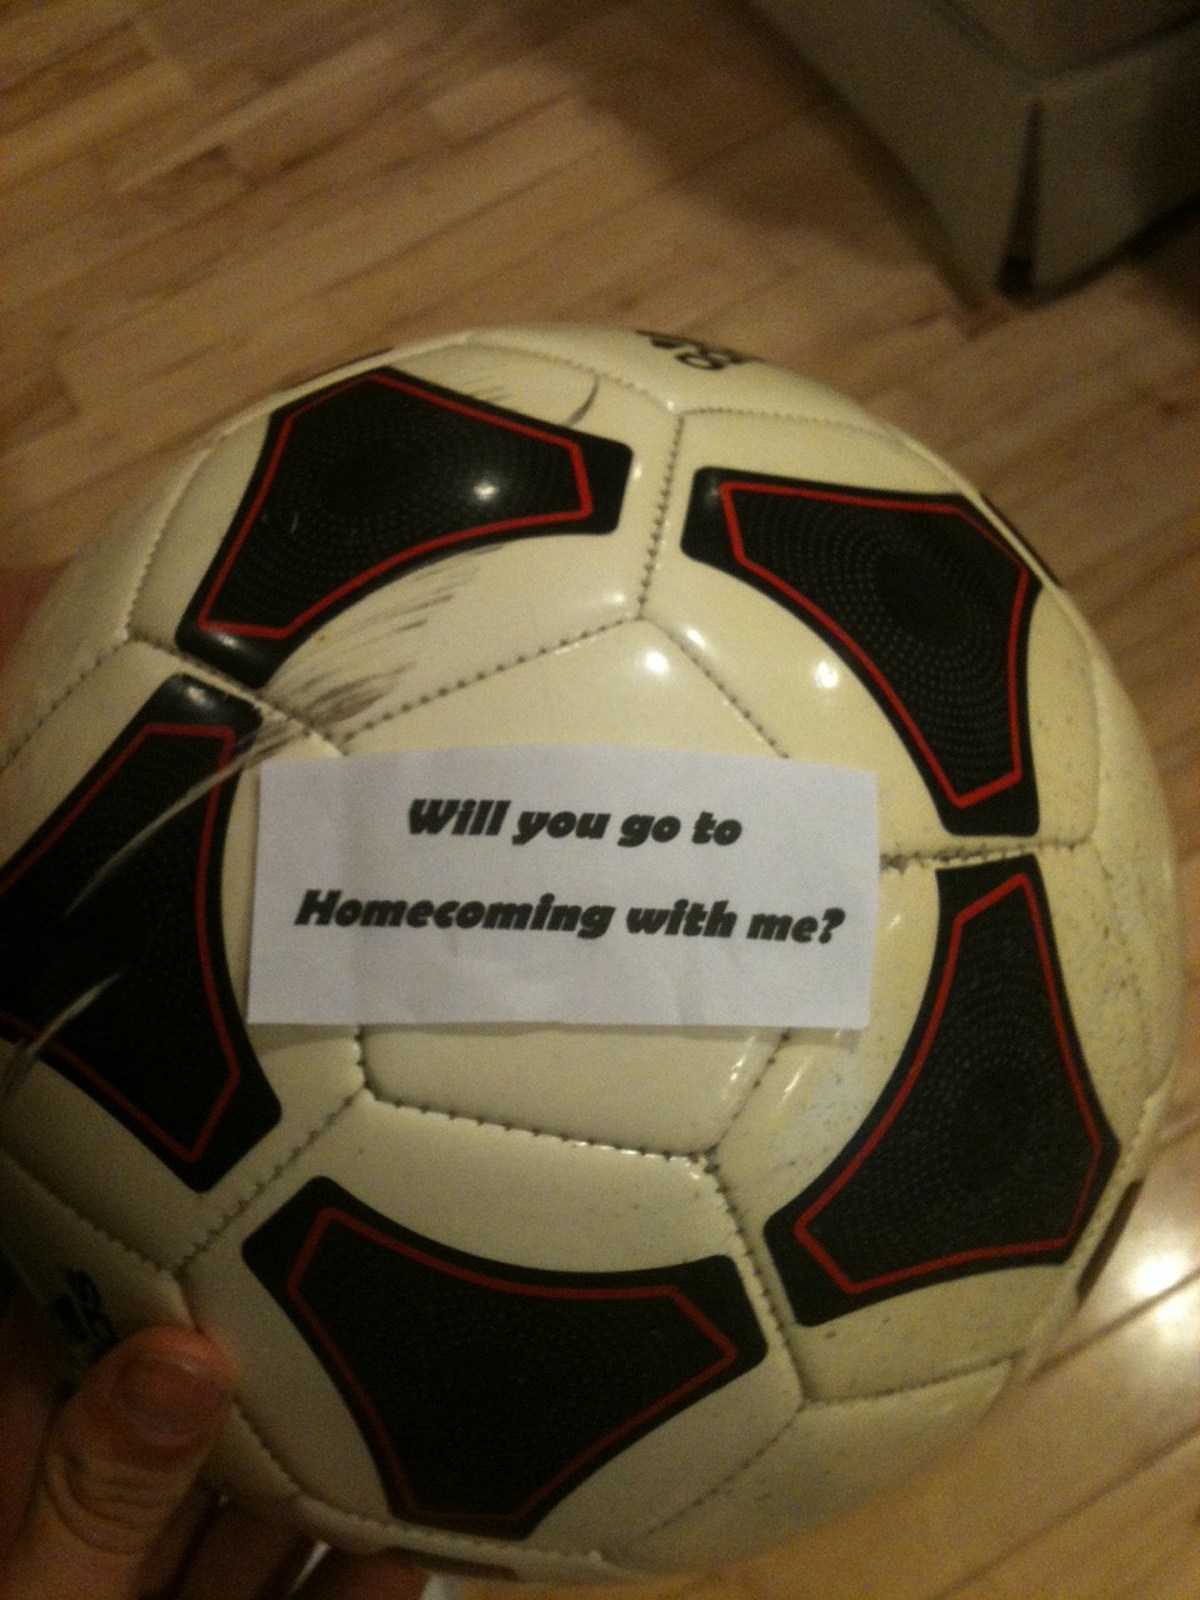 creative ways to ask a girl to homecoming